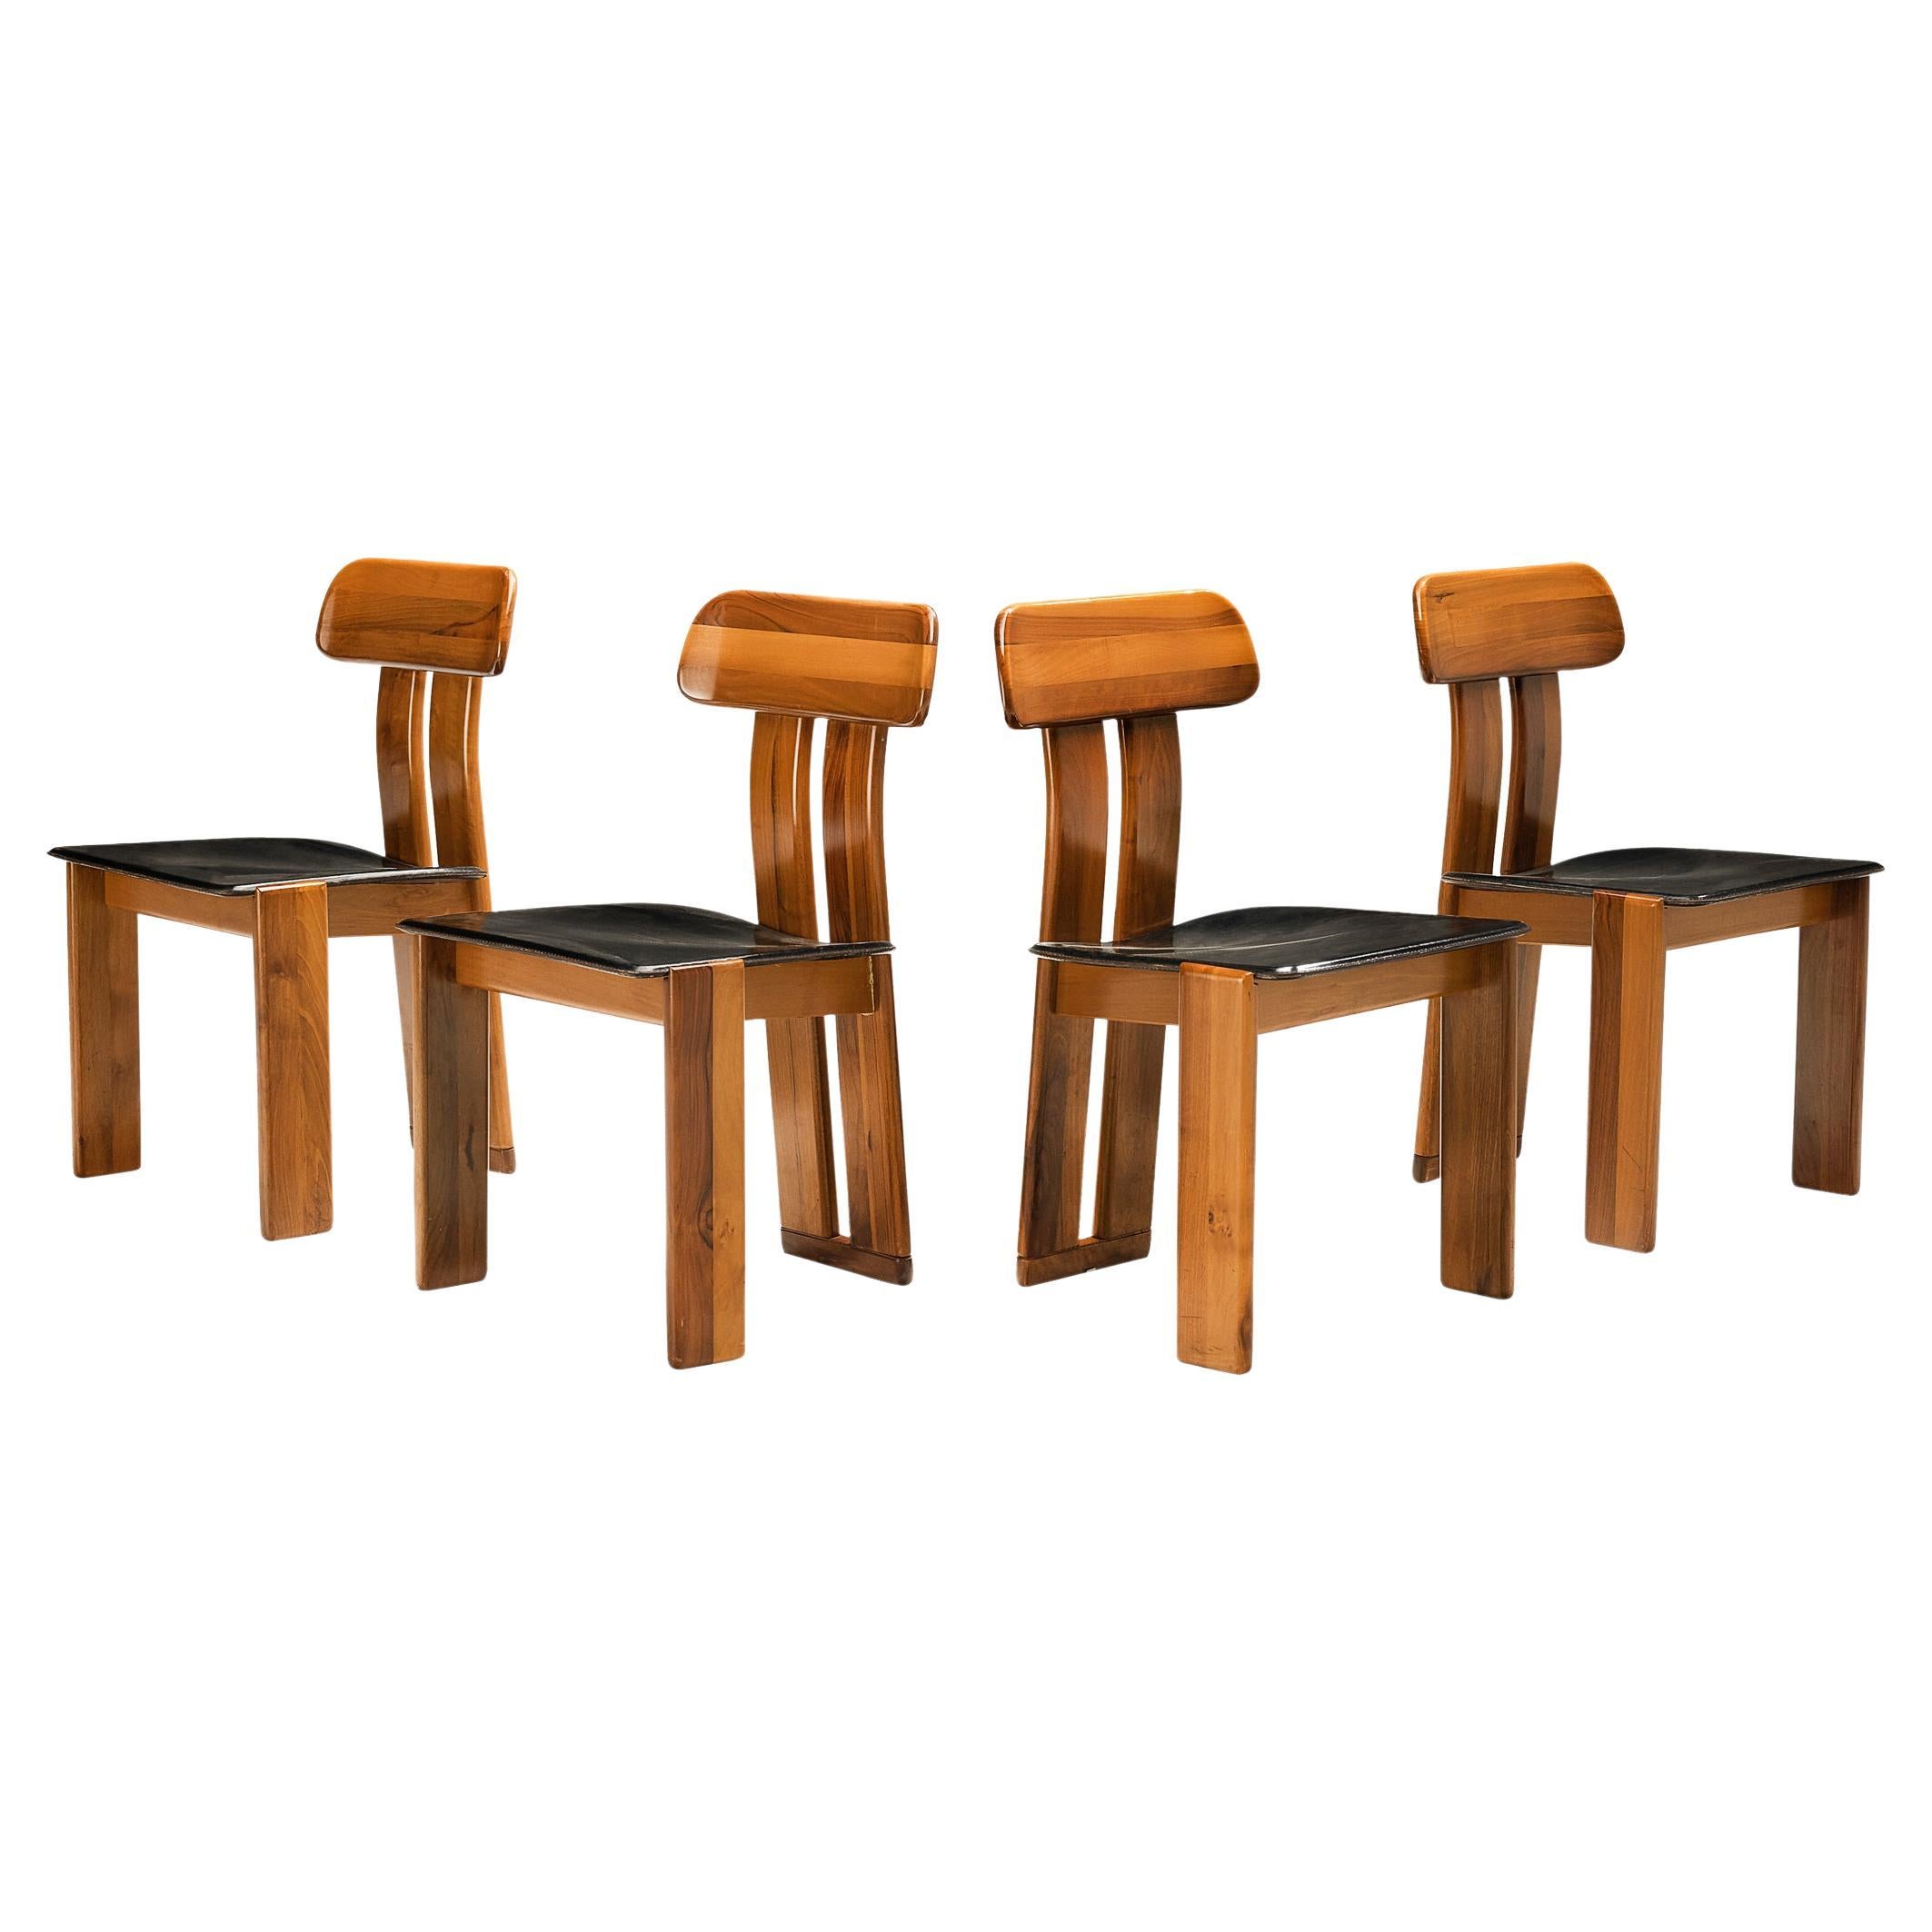 Mario Marenco for Mobil Girgi Set of Four Dining Chairs in Walnut and Leather